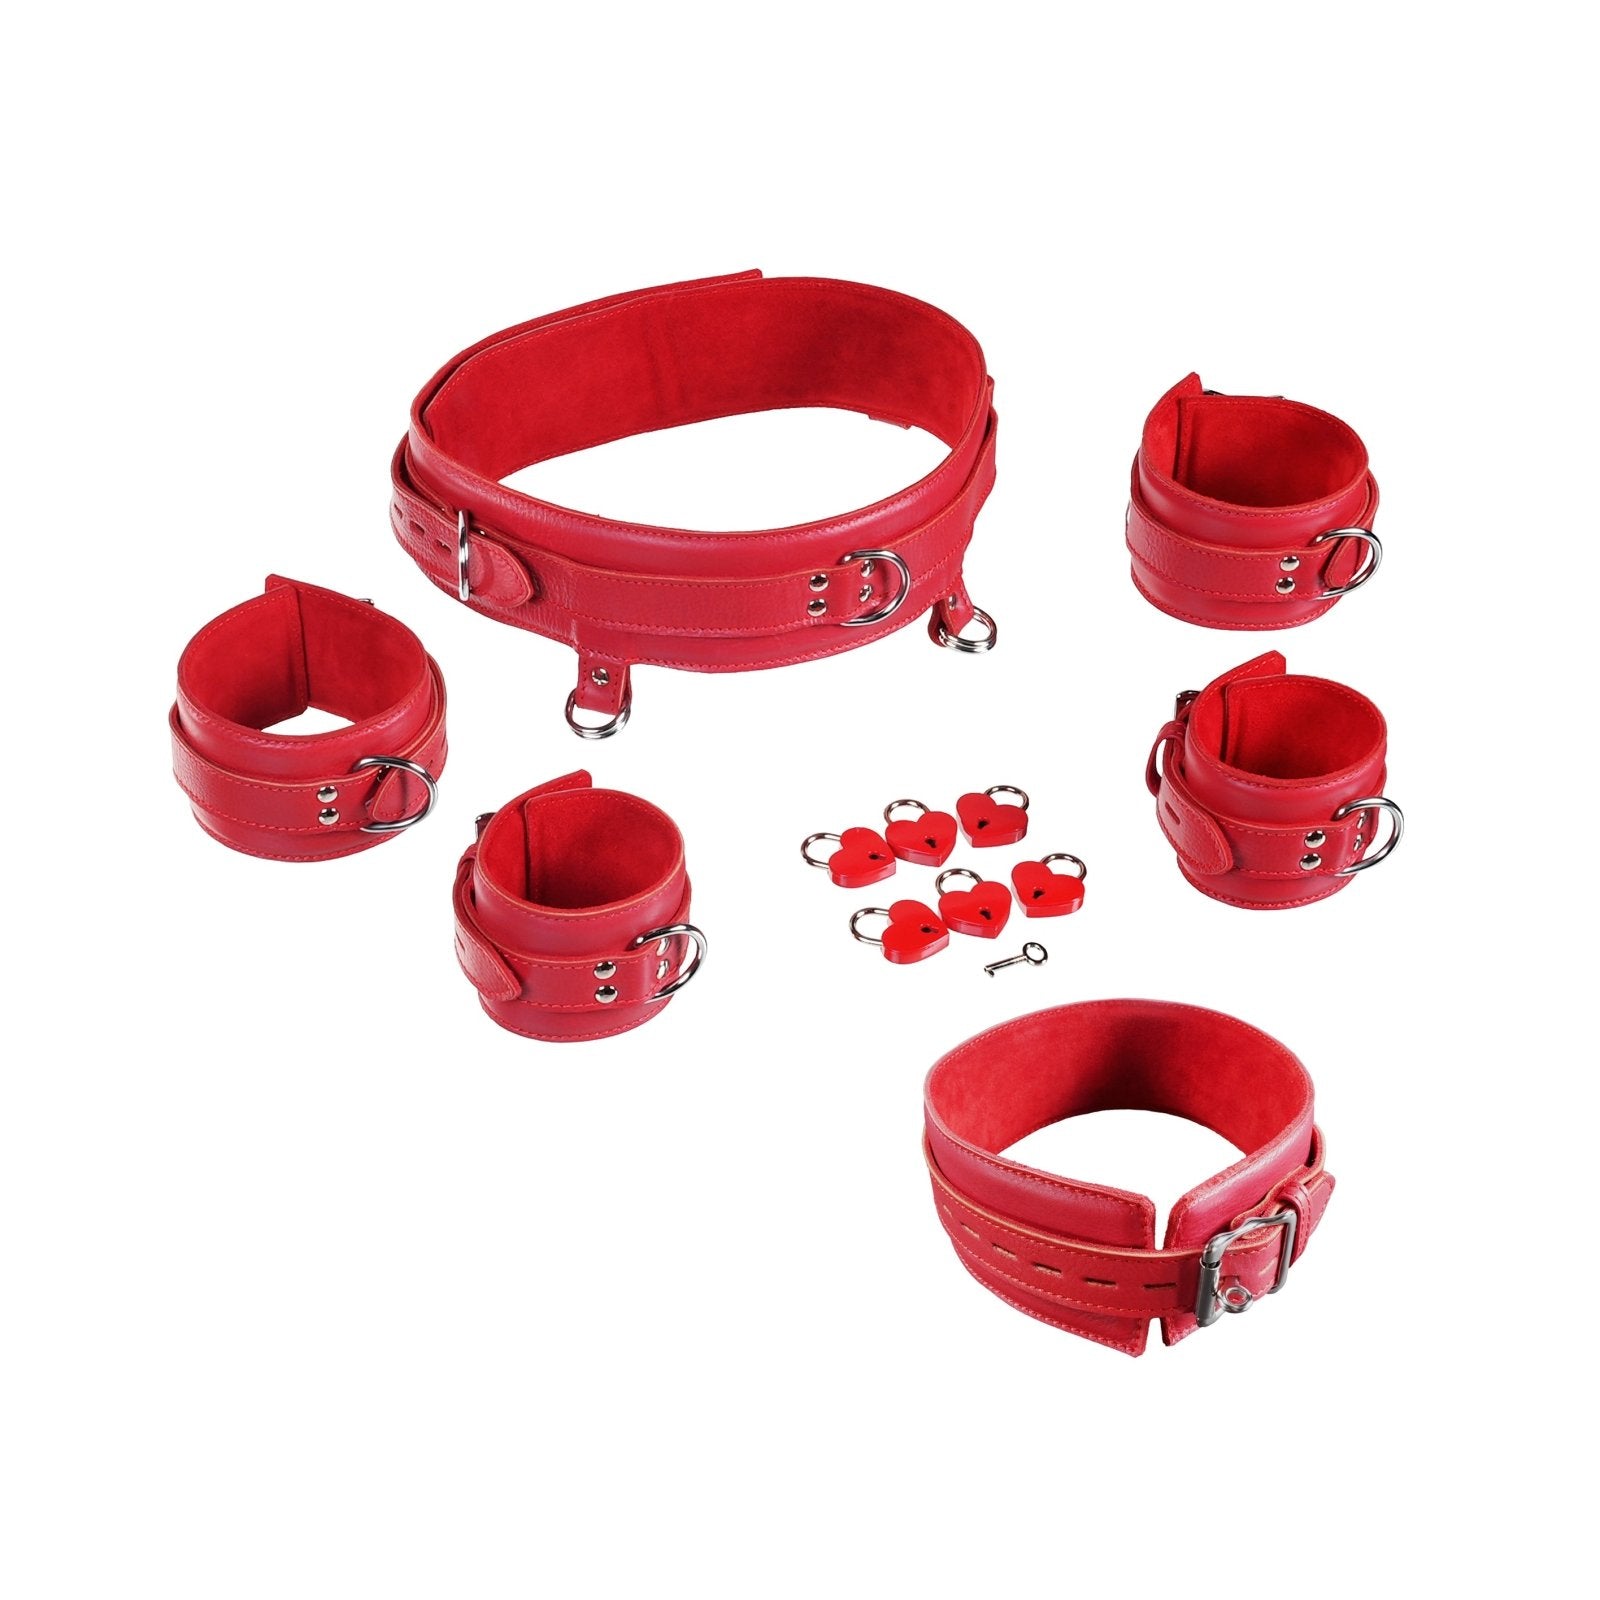 Core By Kink 5 Piece Leather Set with Belt - Kink Store